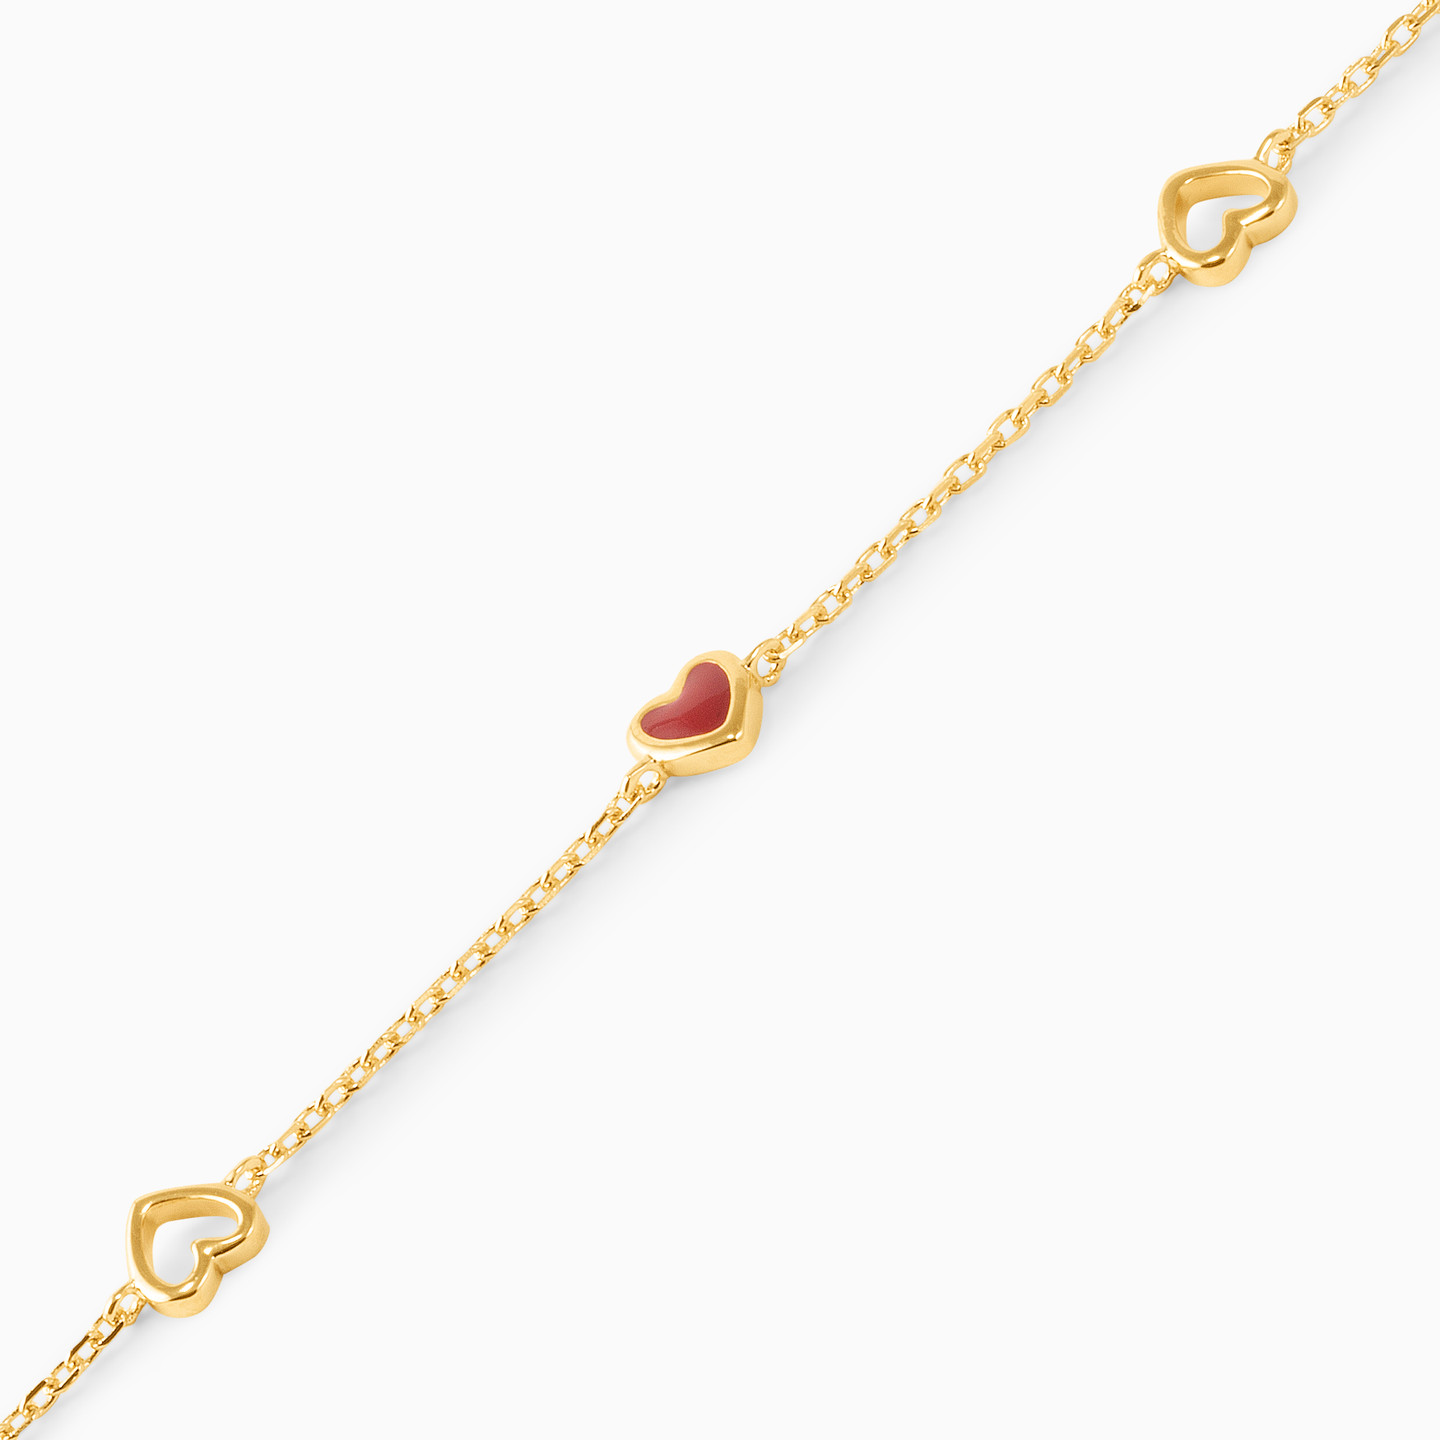 Gold Plated Colored Stones Chain Bracelet - 3